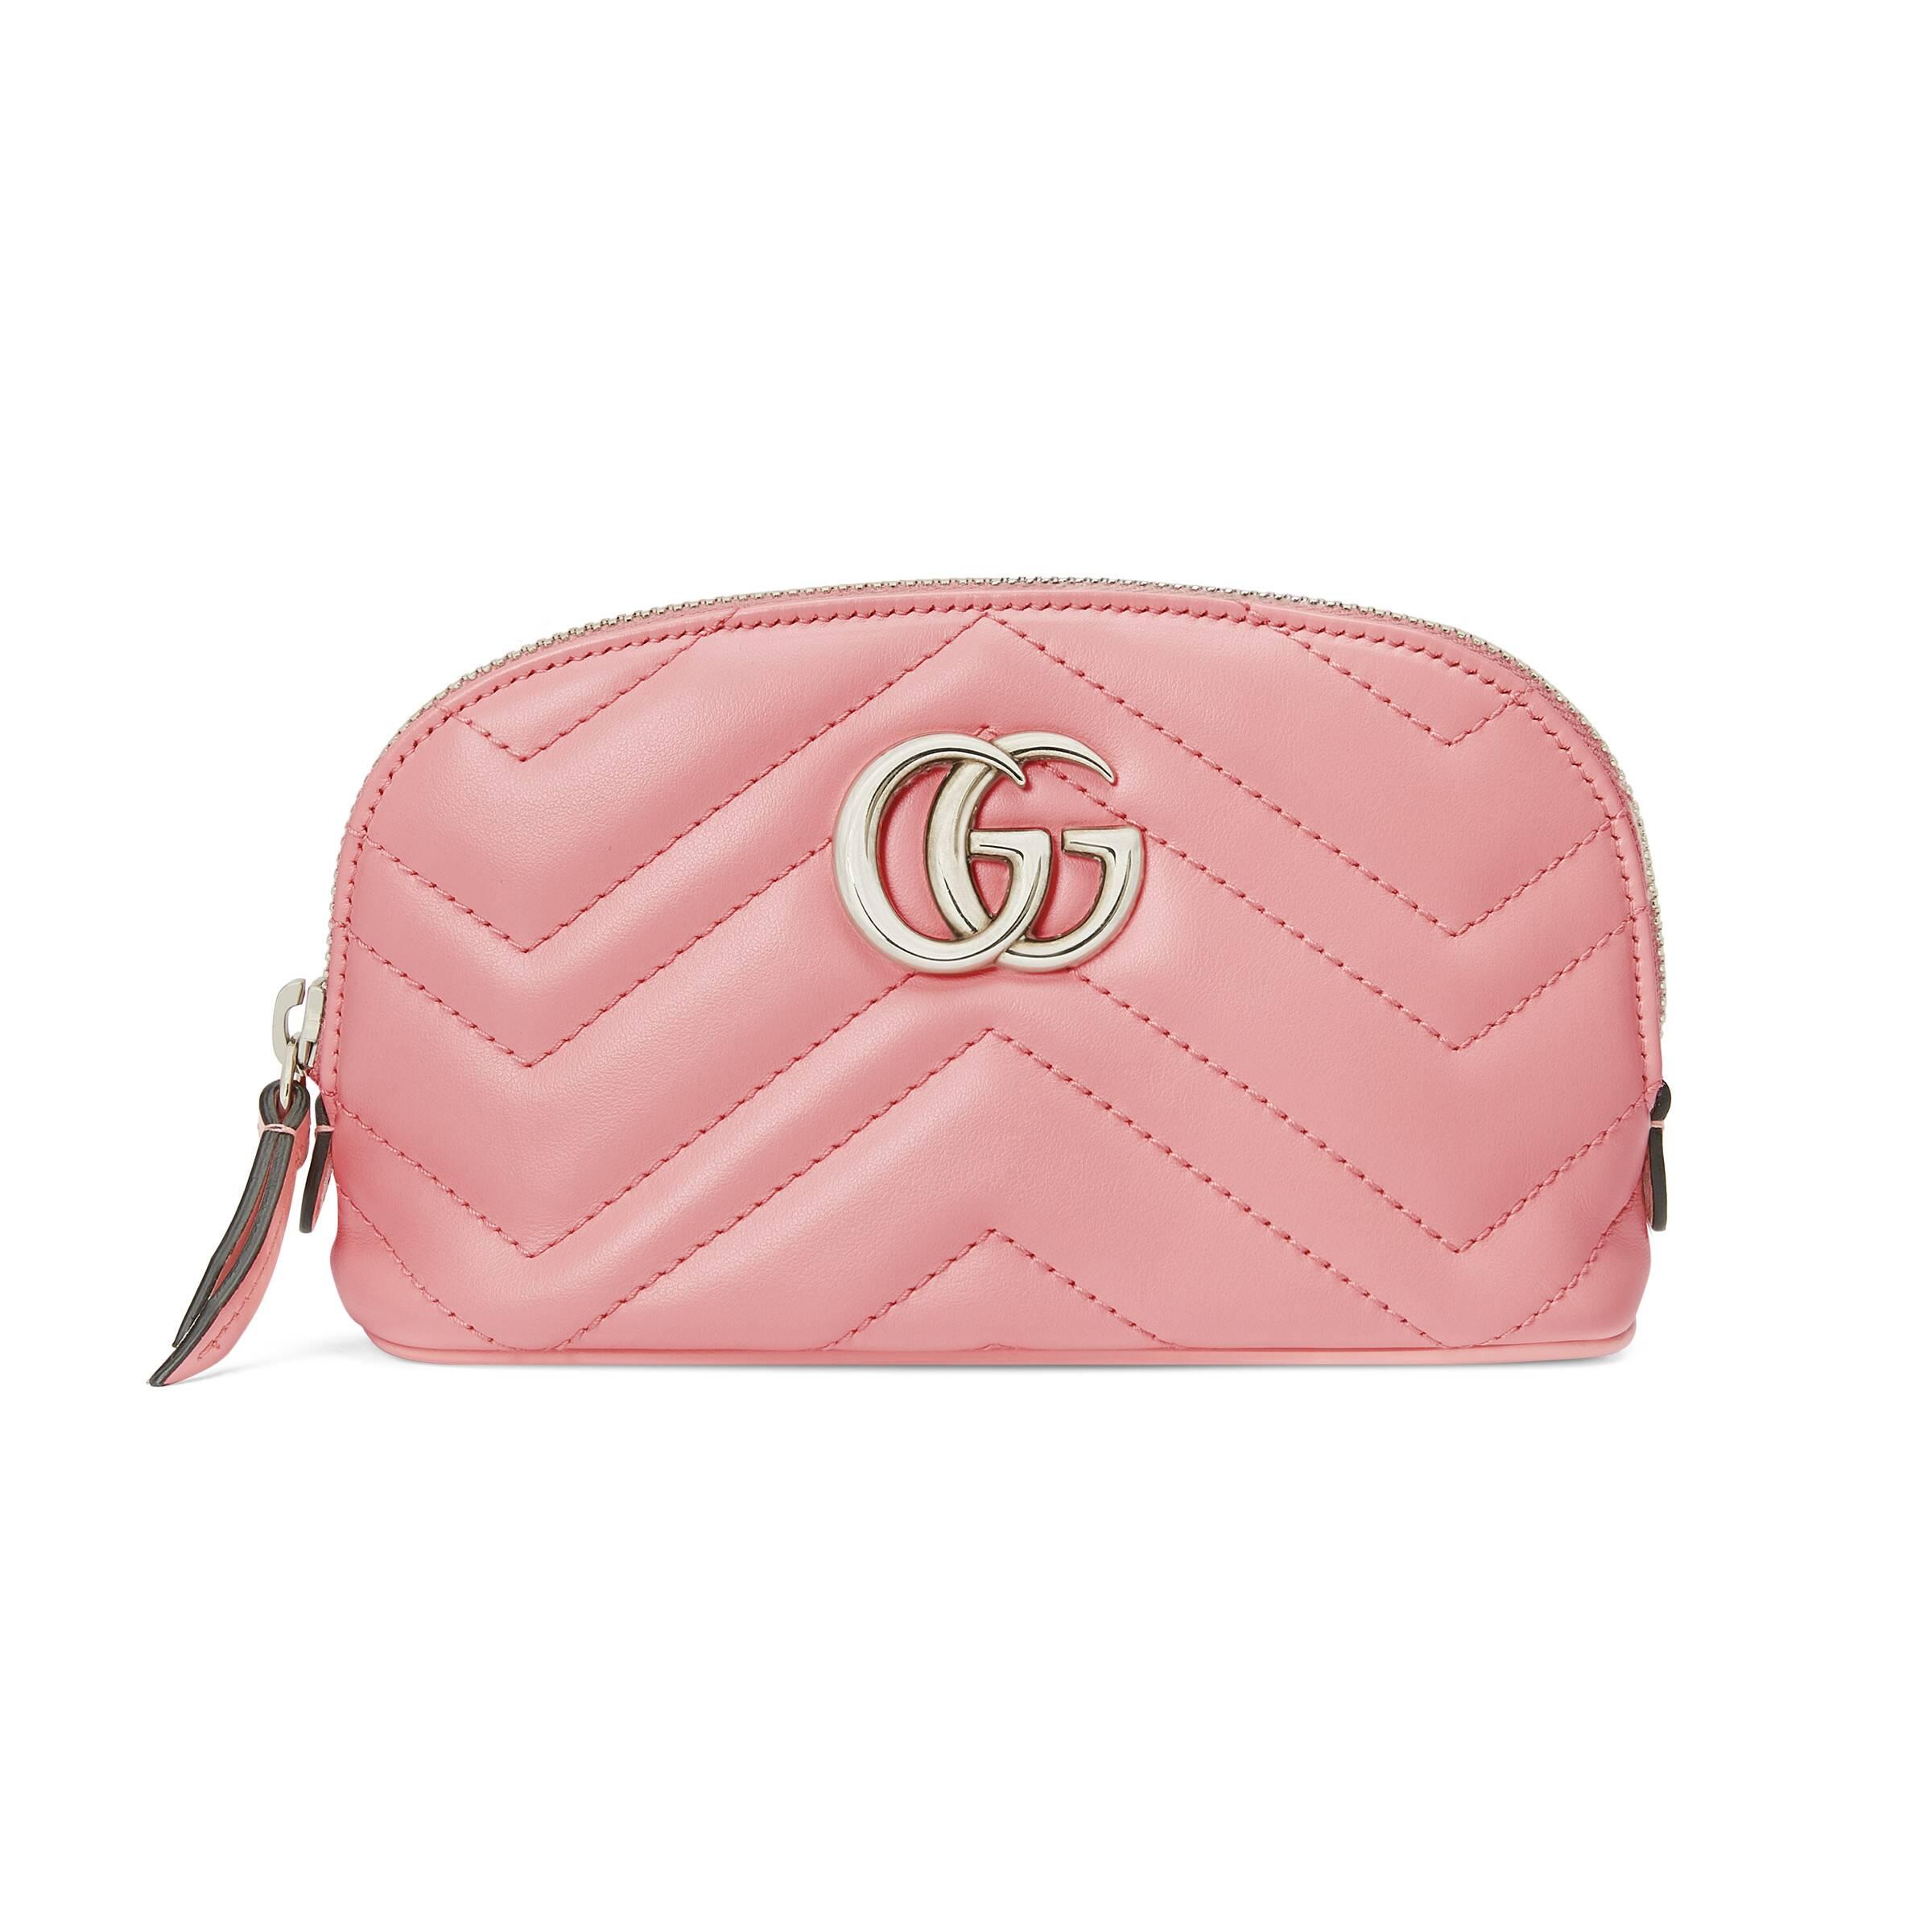 Gucci Leather GG Marmont Cosmetic Case in Pink - Lyst